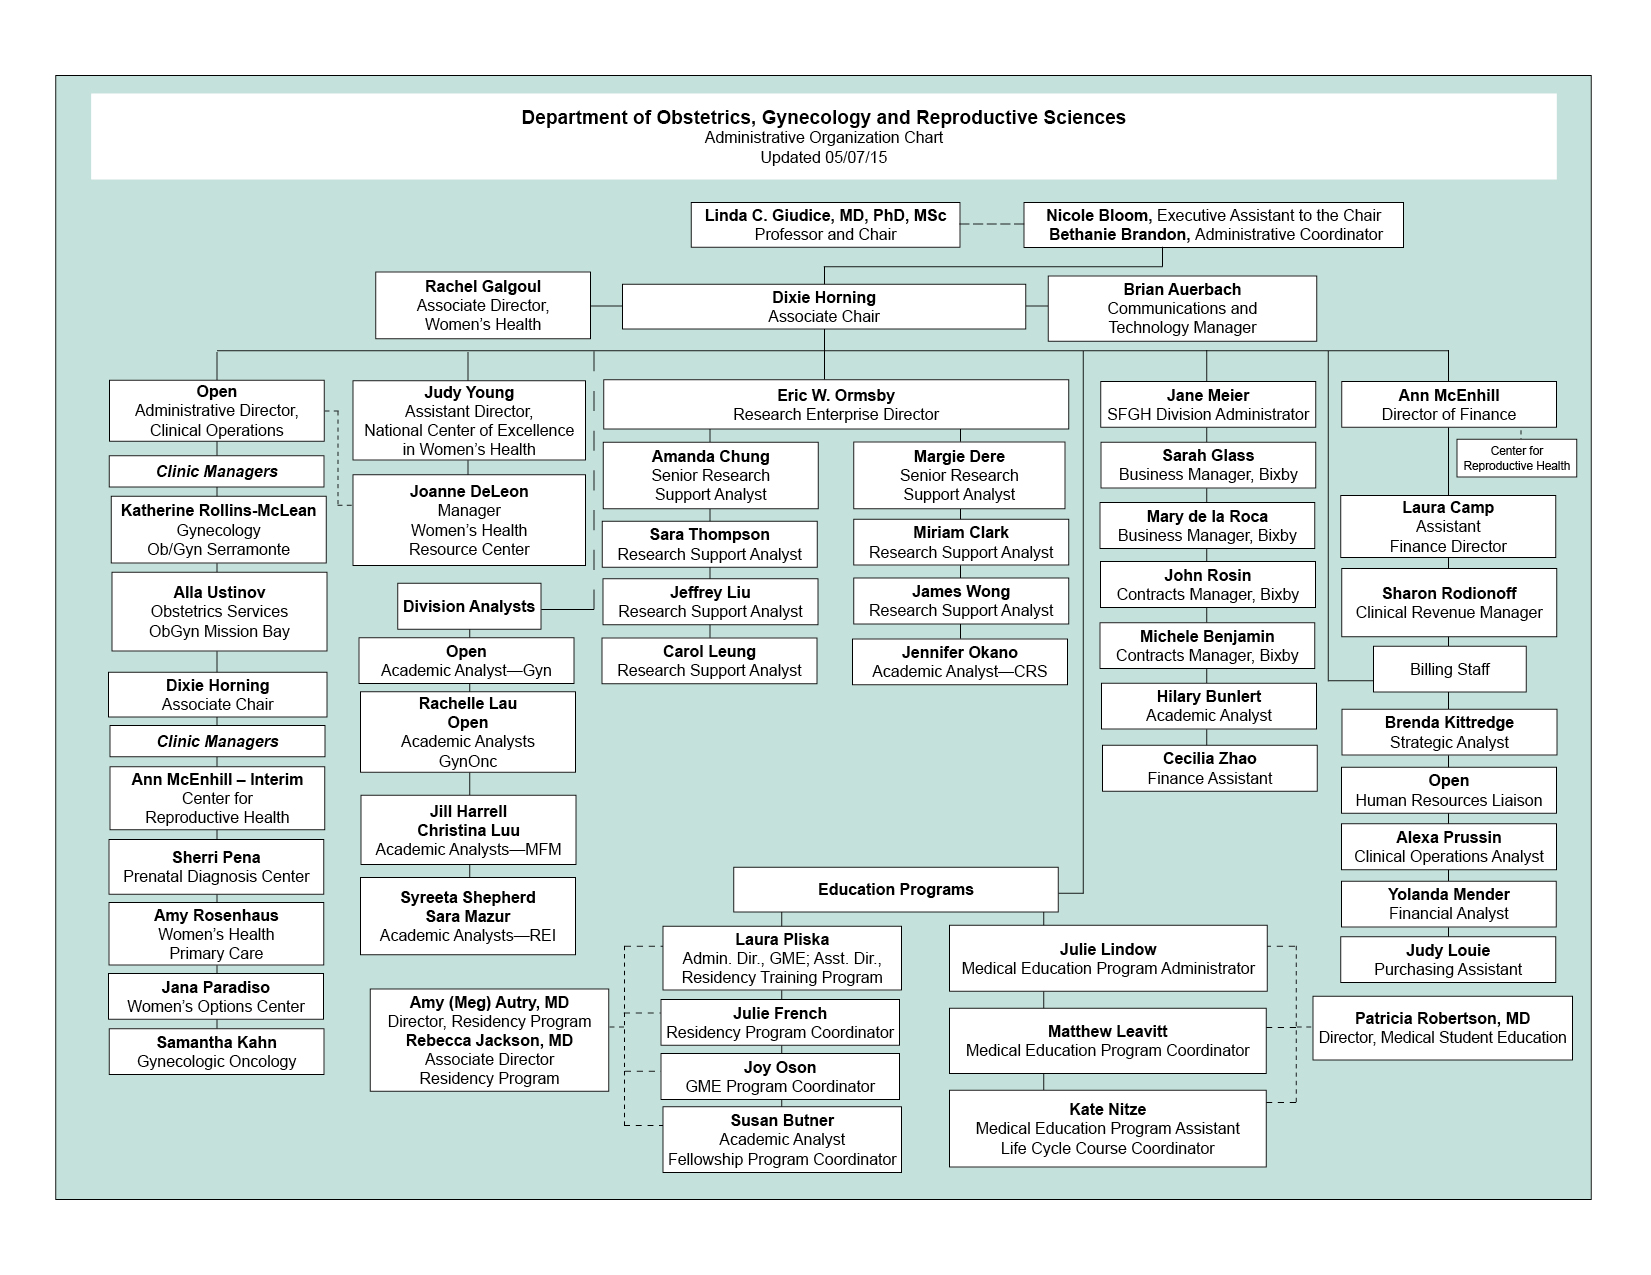 Organizational Charts Obstetrics, Gynecology & Reproductive Services